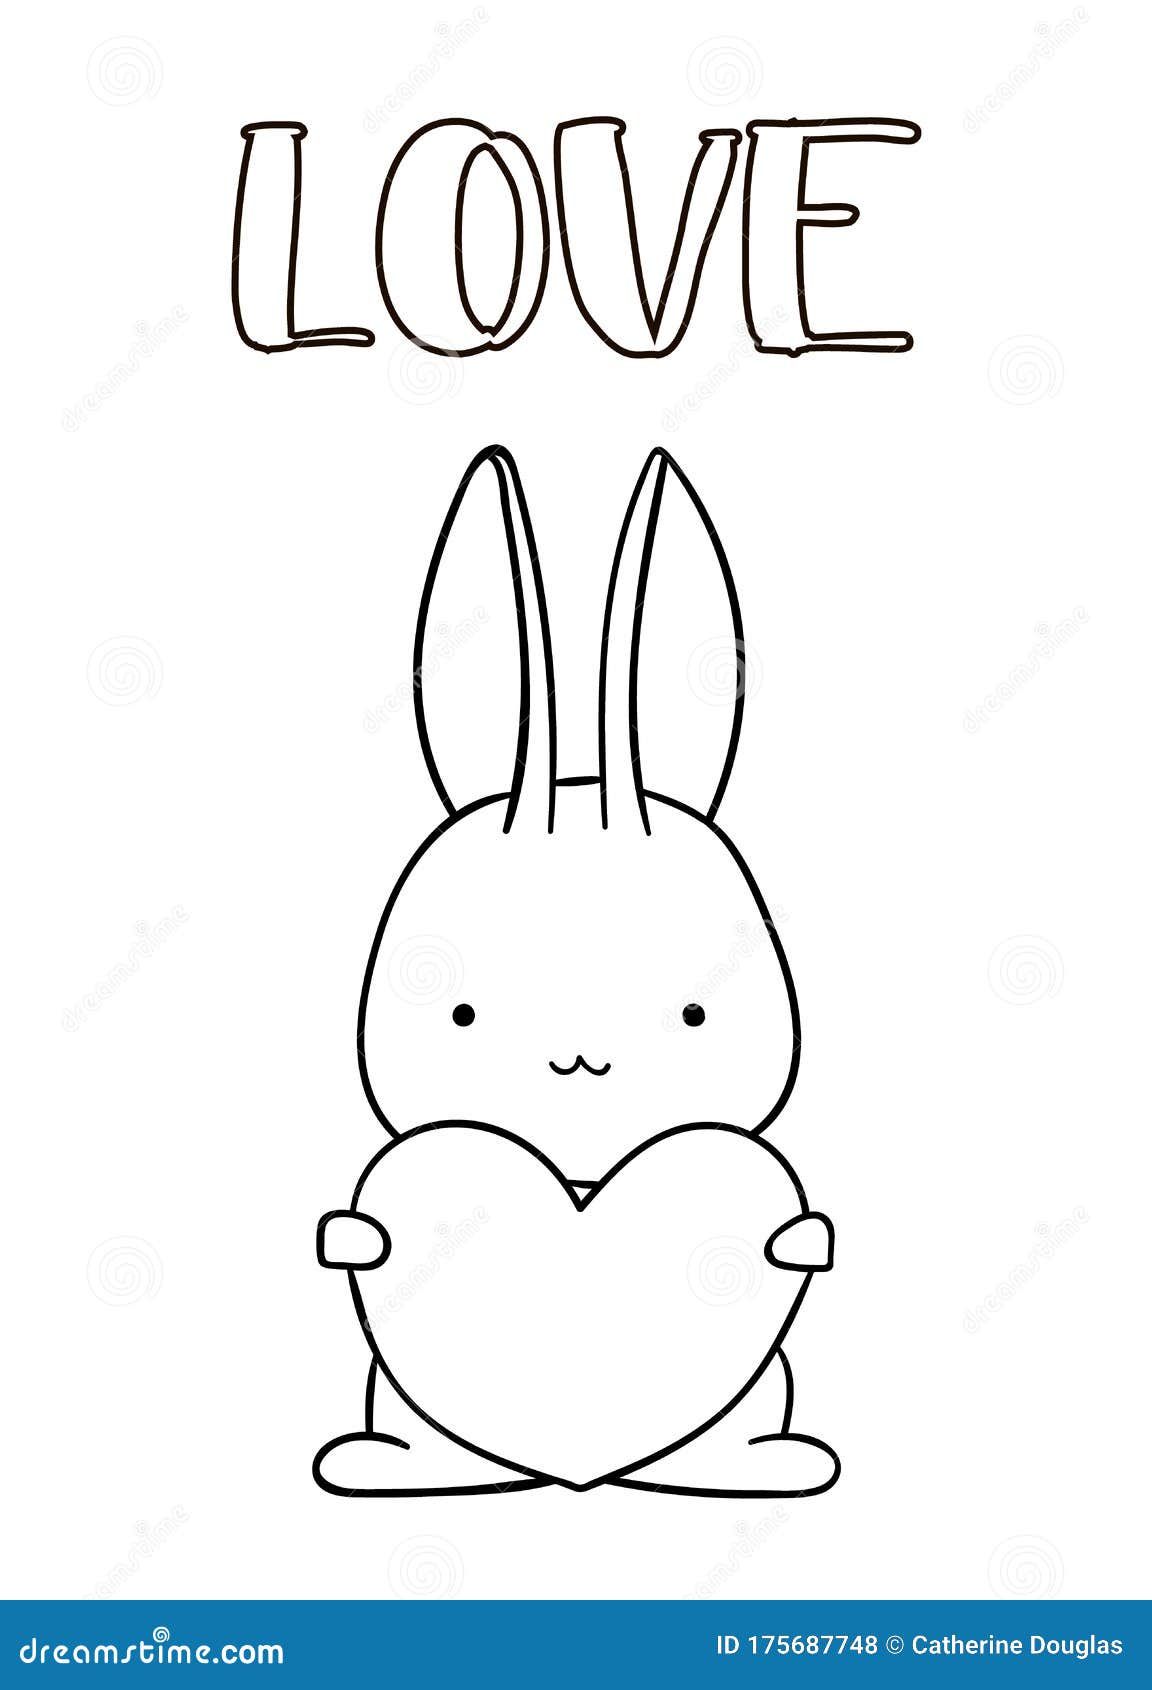 Coloring Pages, Black and White Cute Hand Drawn Bunny with Heart ...